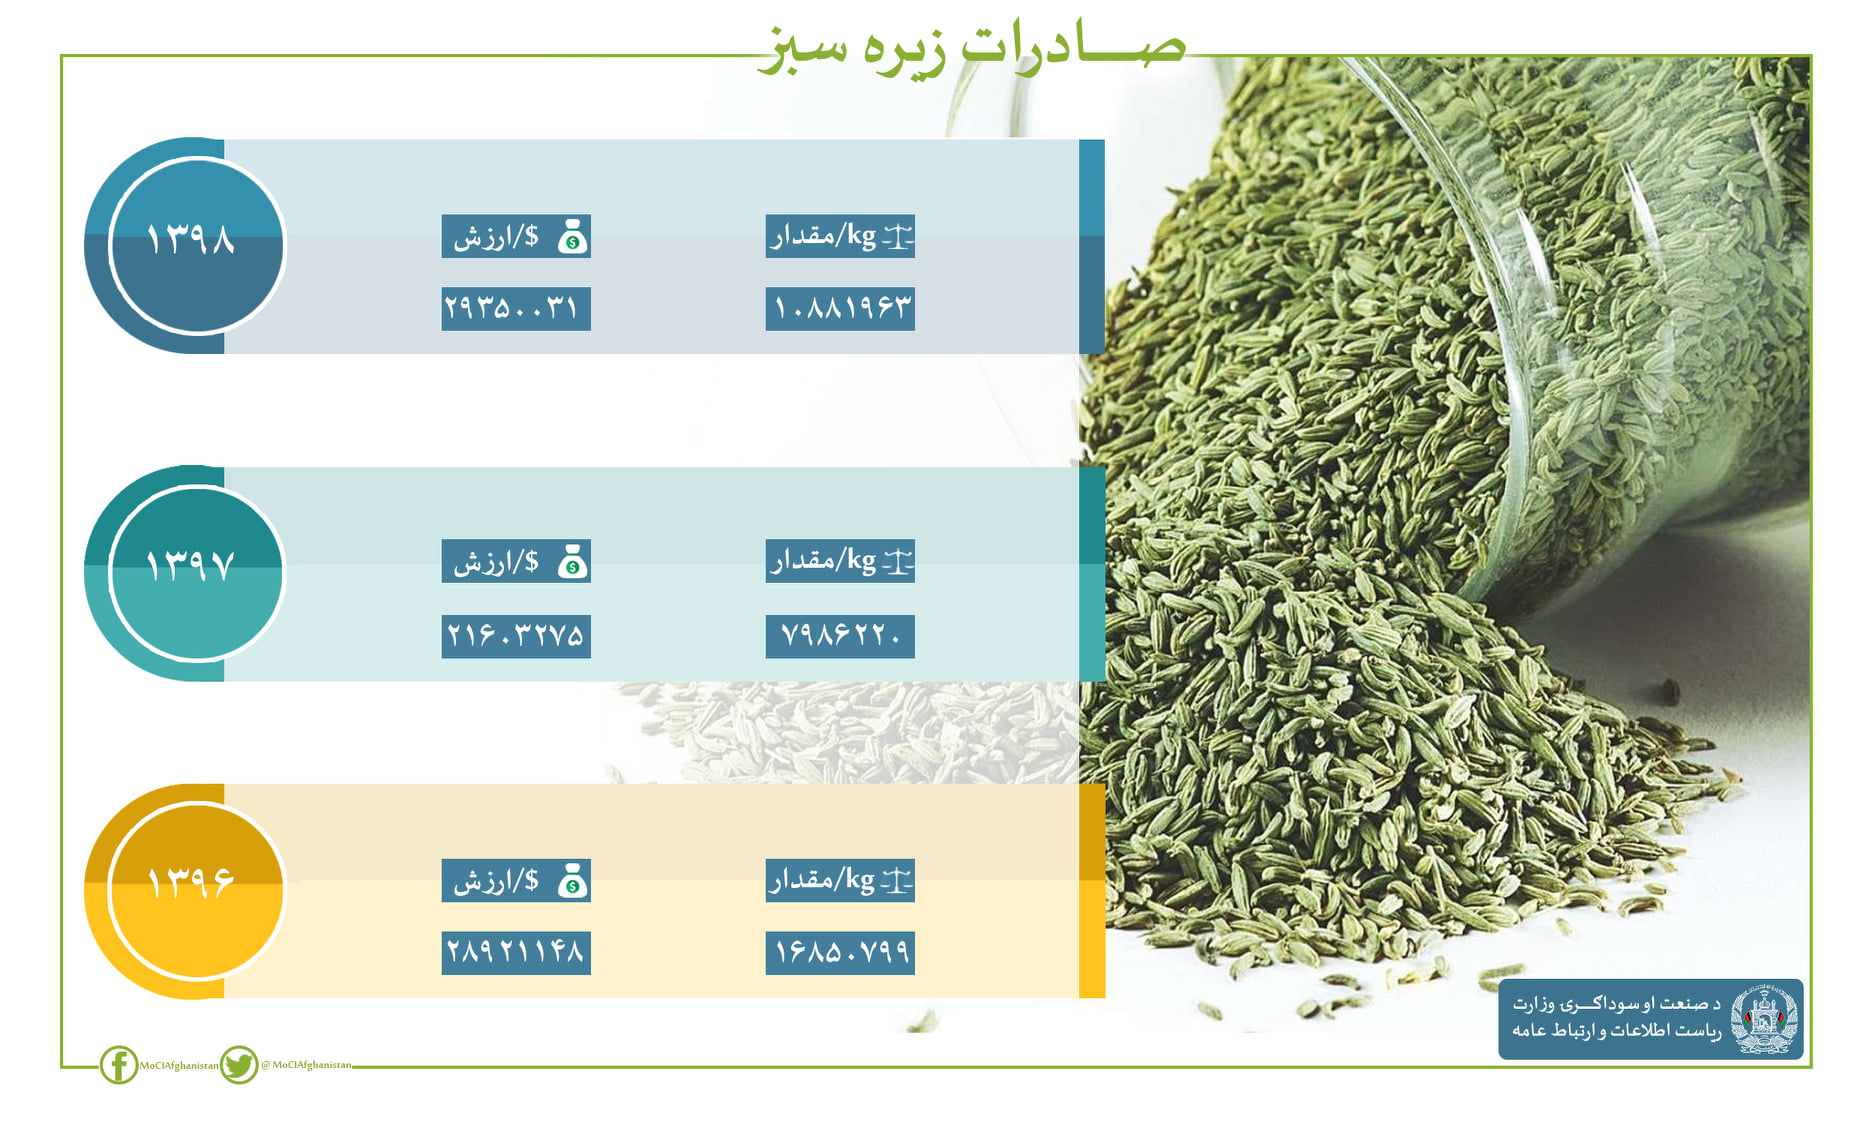 Cumin Exports in the last three years